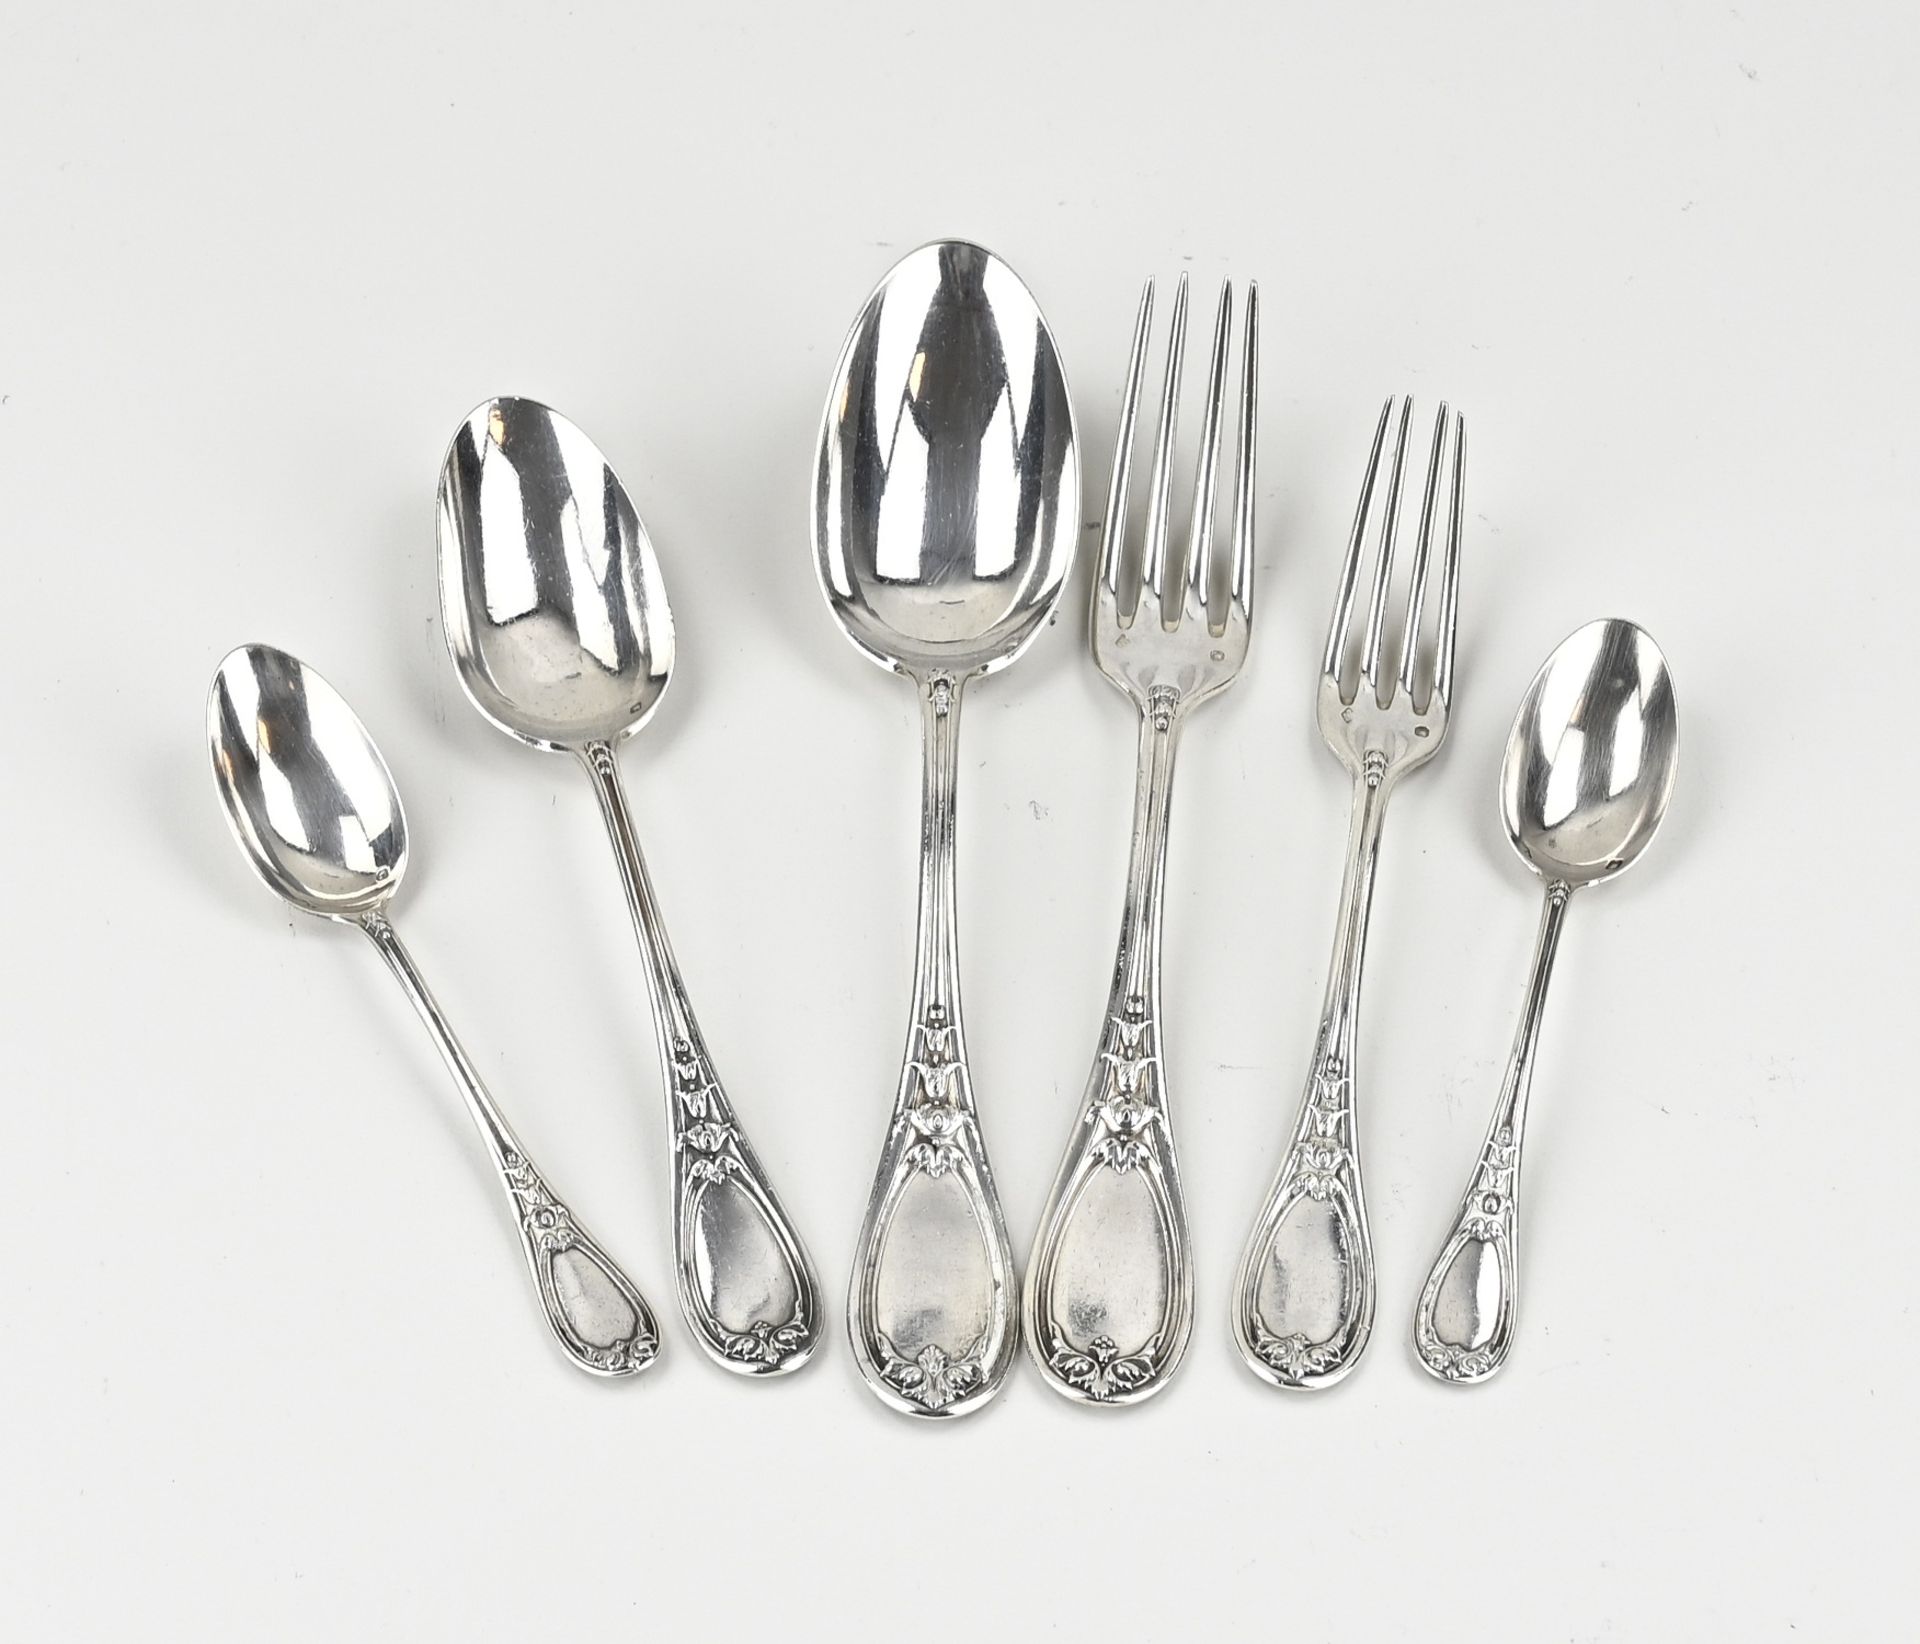 6 Silver spoons/forks